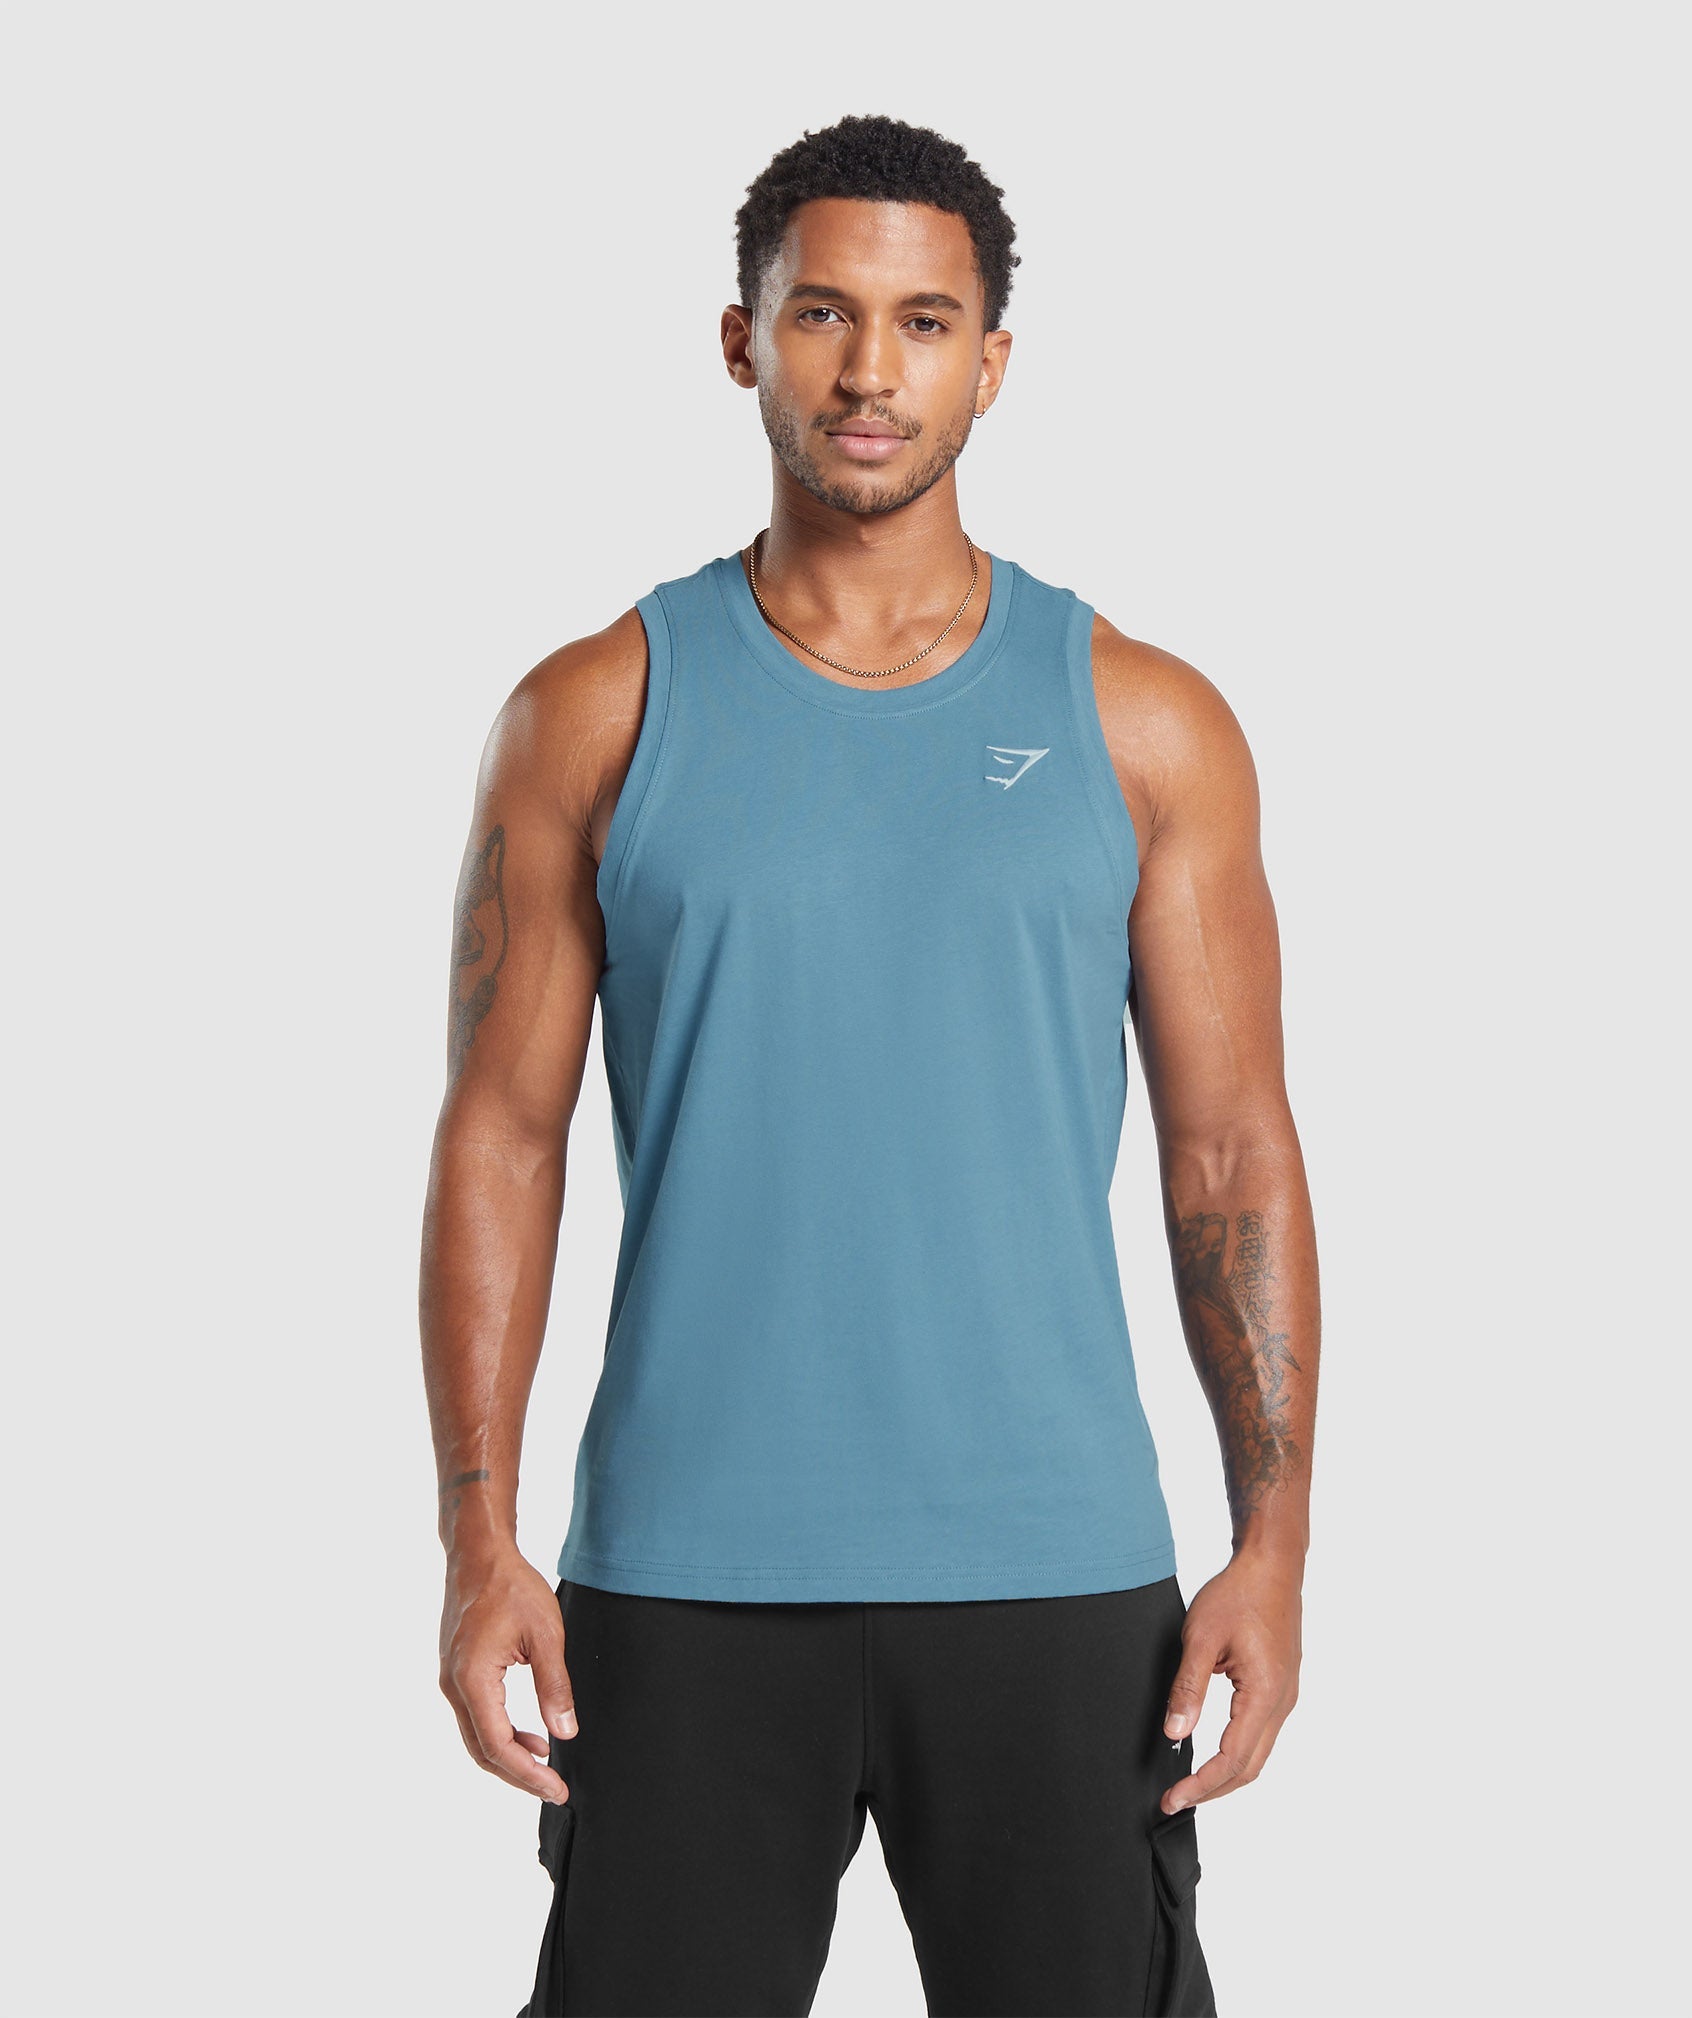 Crest Tank in {{variantColor} is out of stock